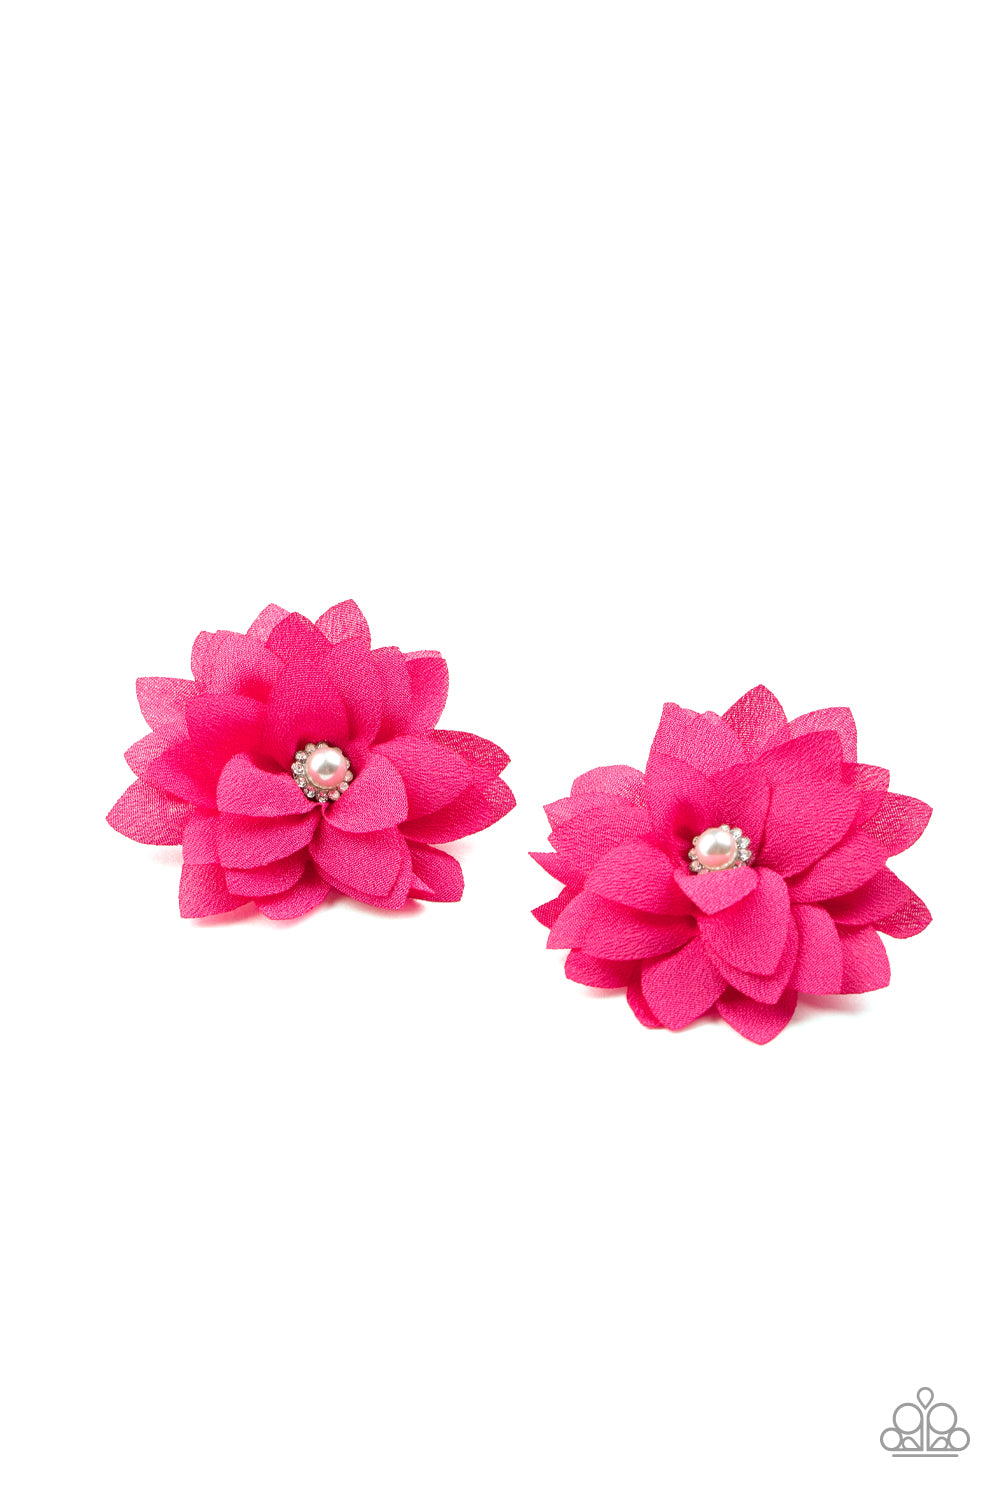 Things That Go BLOOM! - Pink Paparazzi Hair Accessories